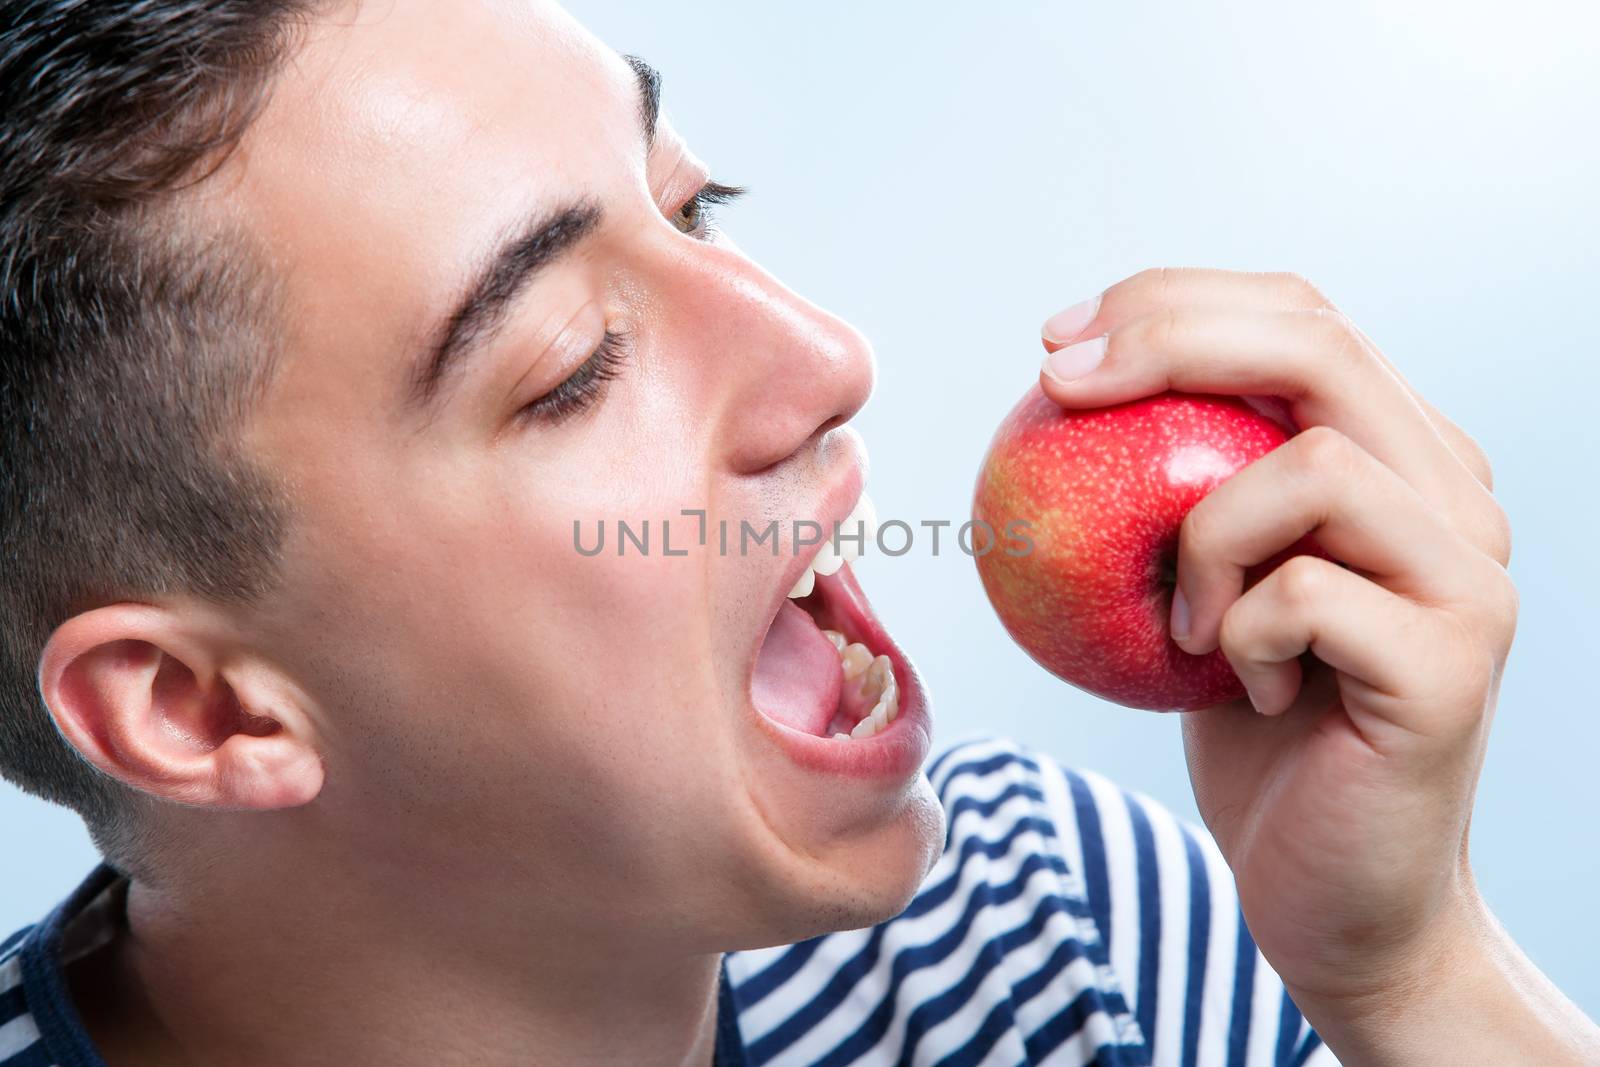 Young man about to bite apple. by karelnoppe